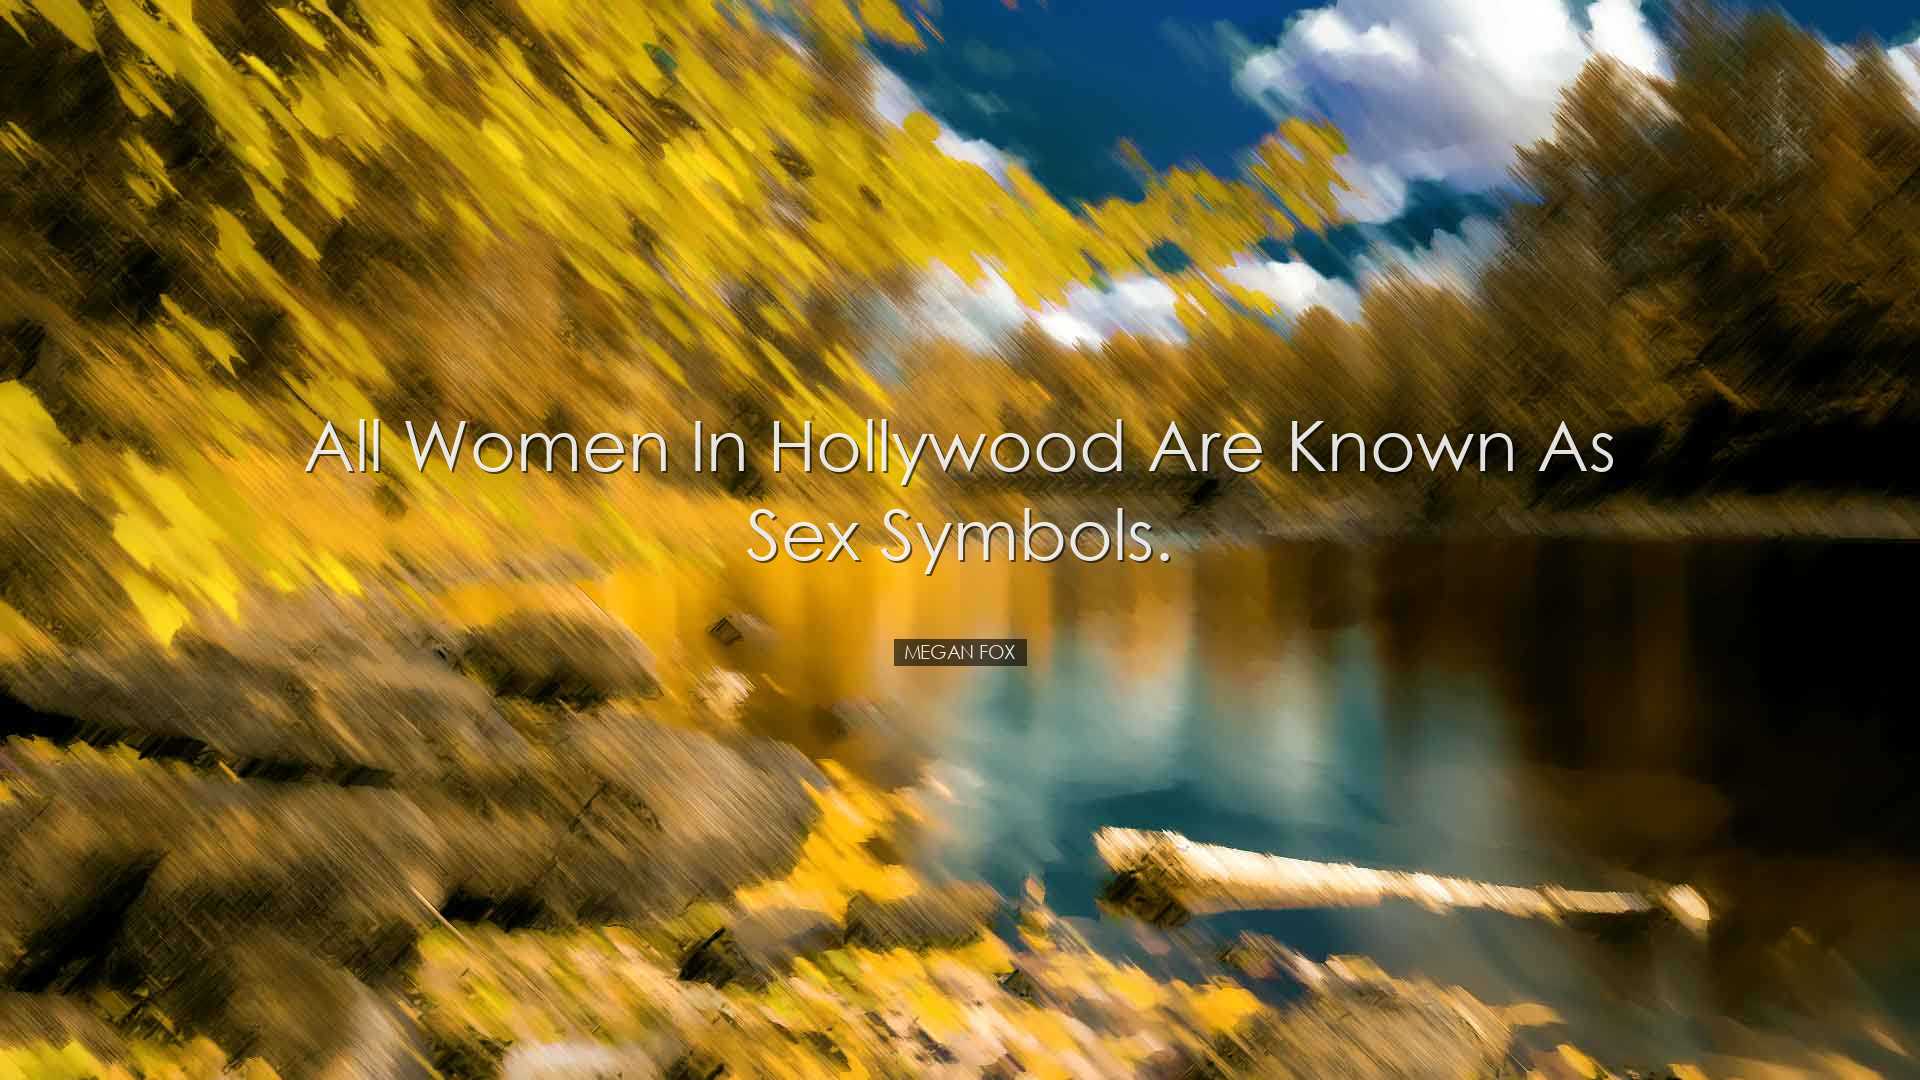 All women in Hollywood are known as sex symbols. - Megan Fox